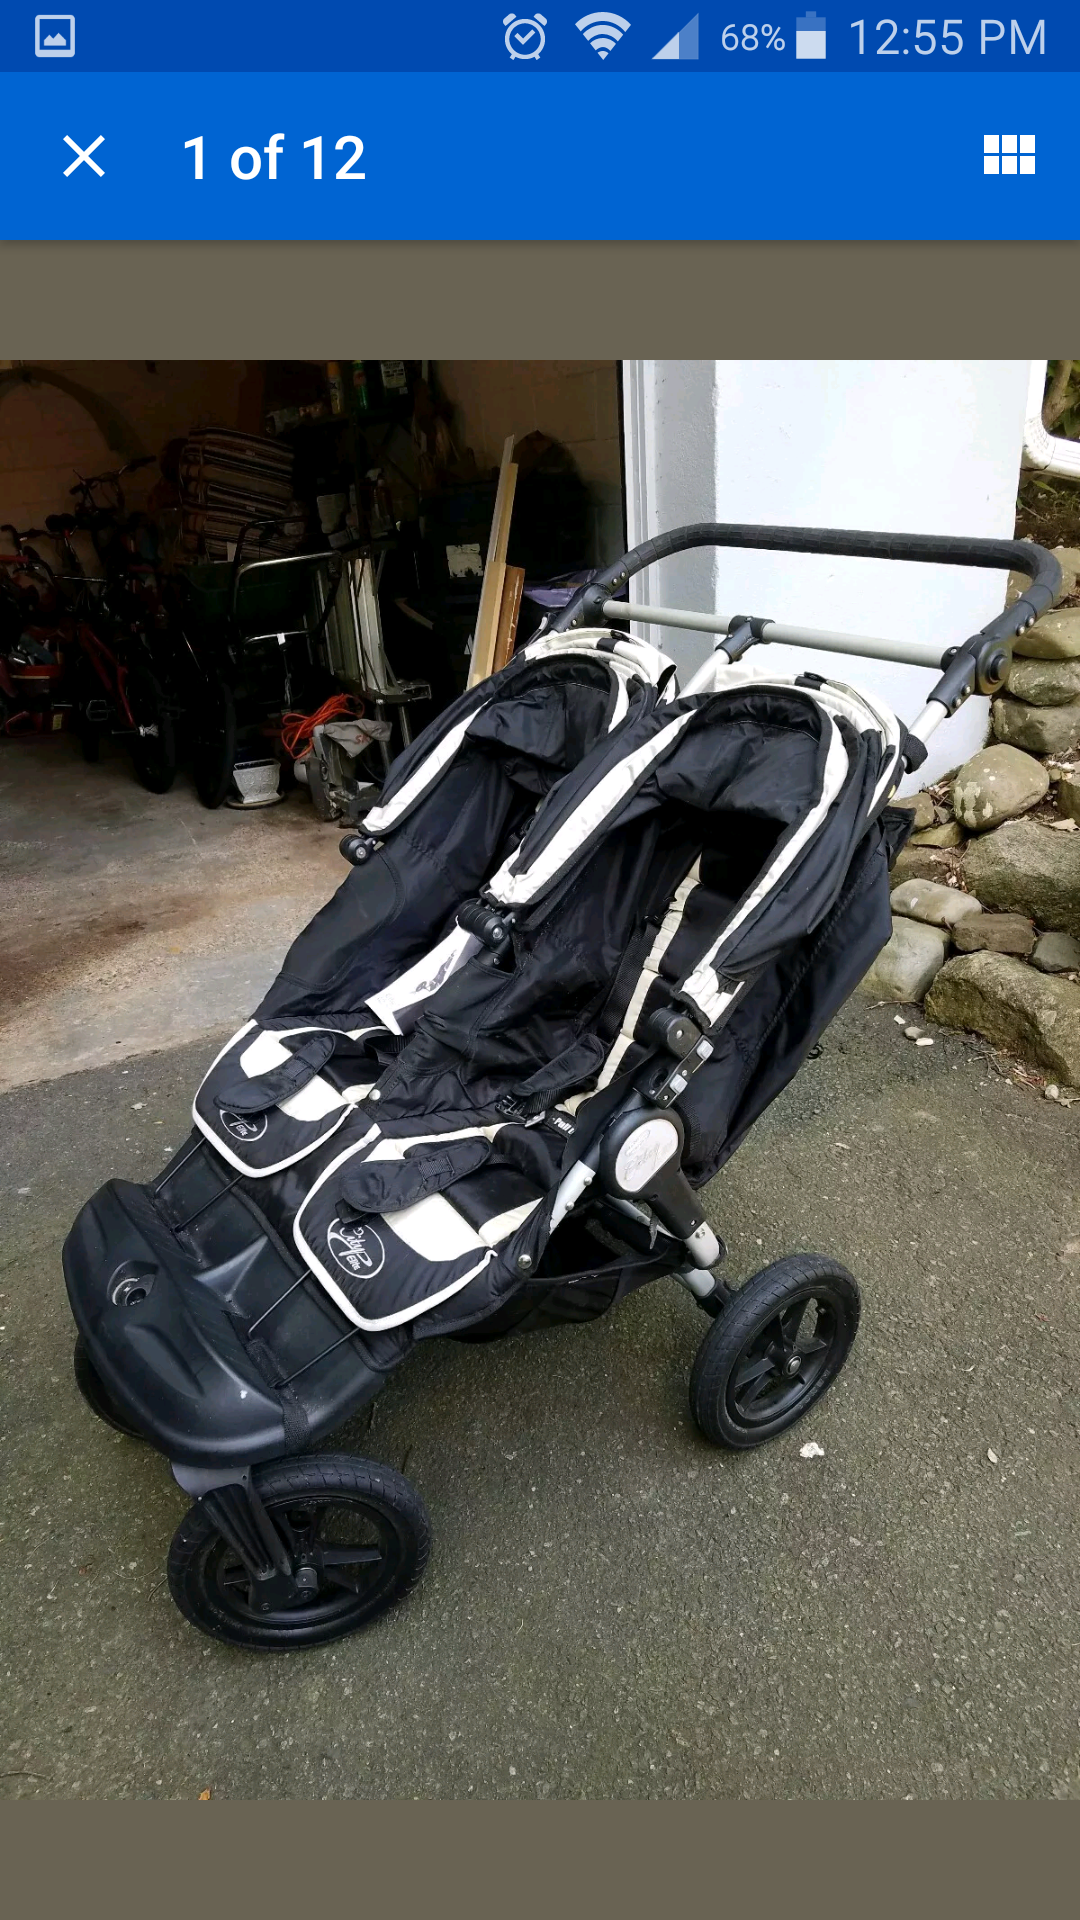 Baby City Elite Double ) for Sale in Moreno Valley, CA - OfferUp